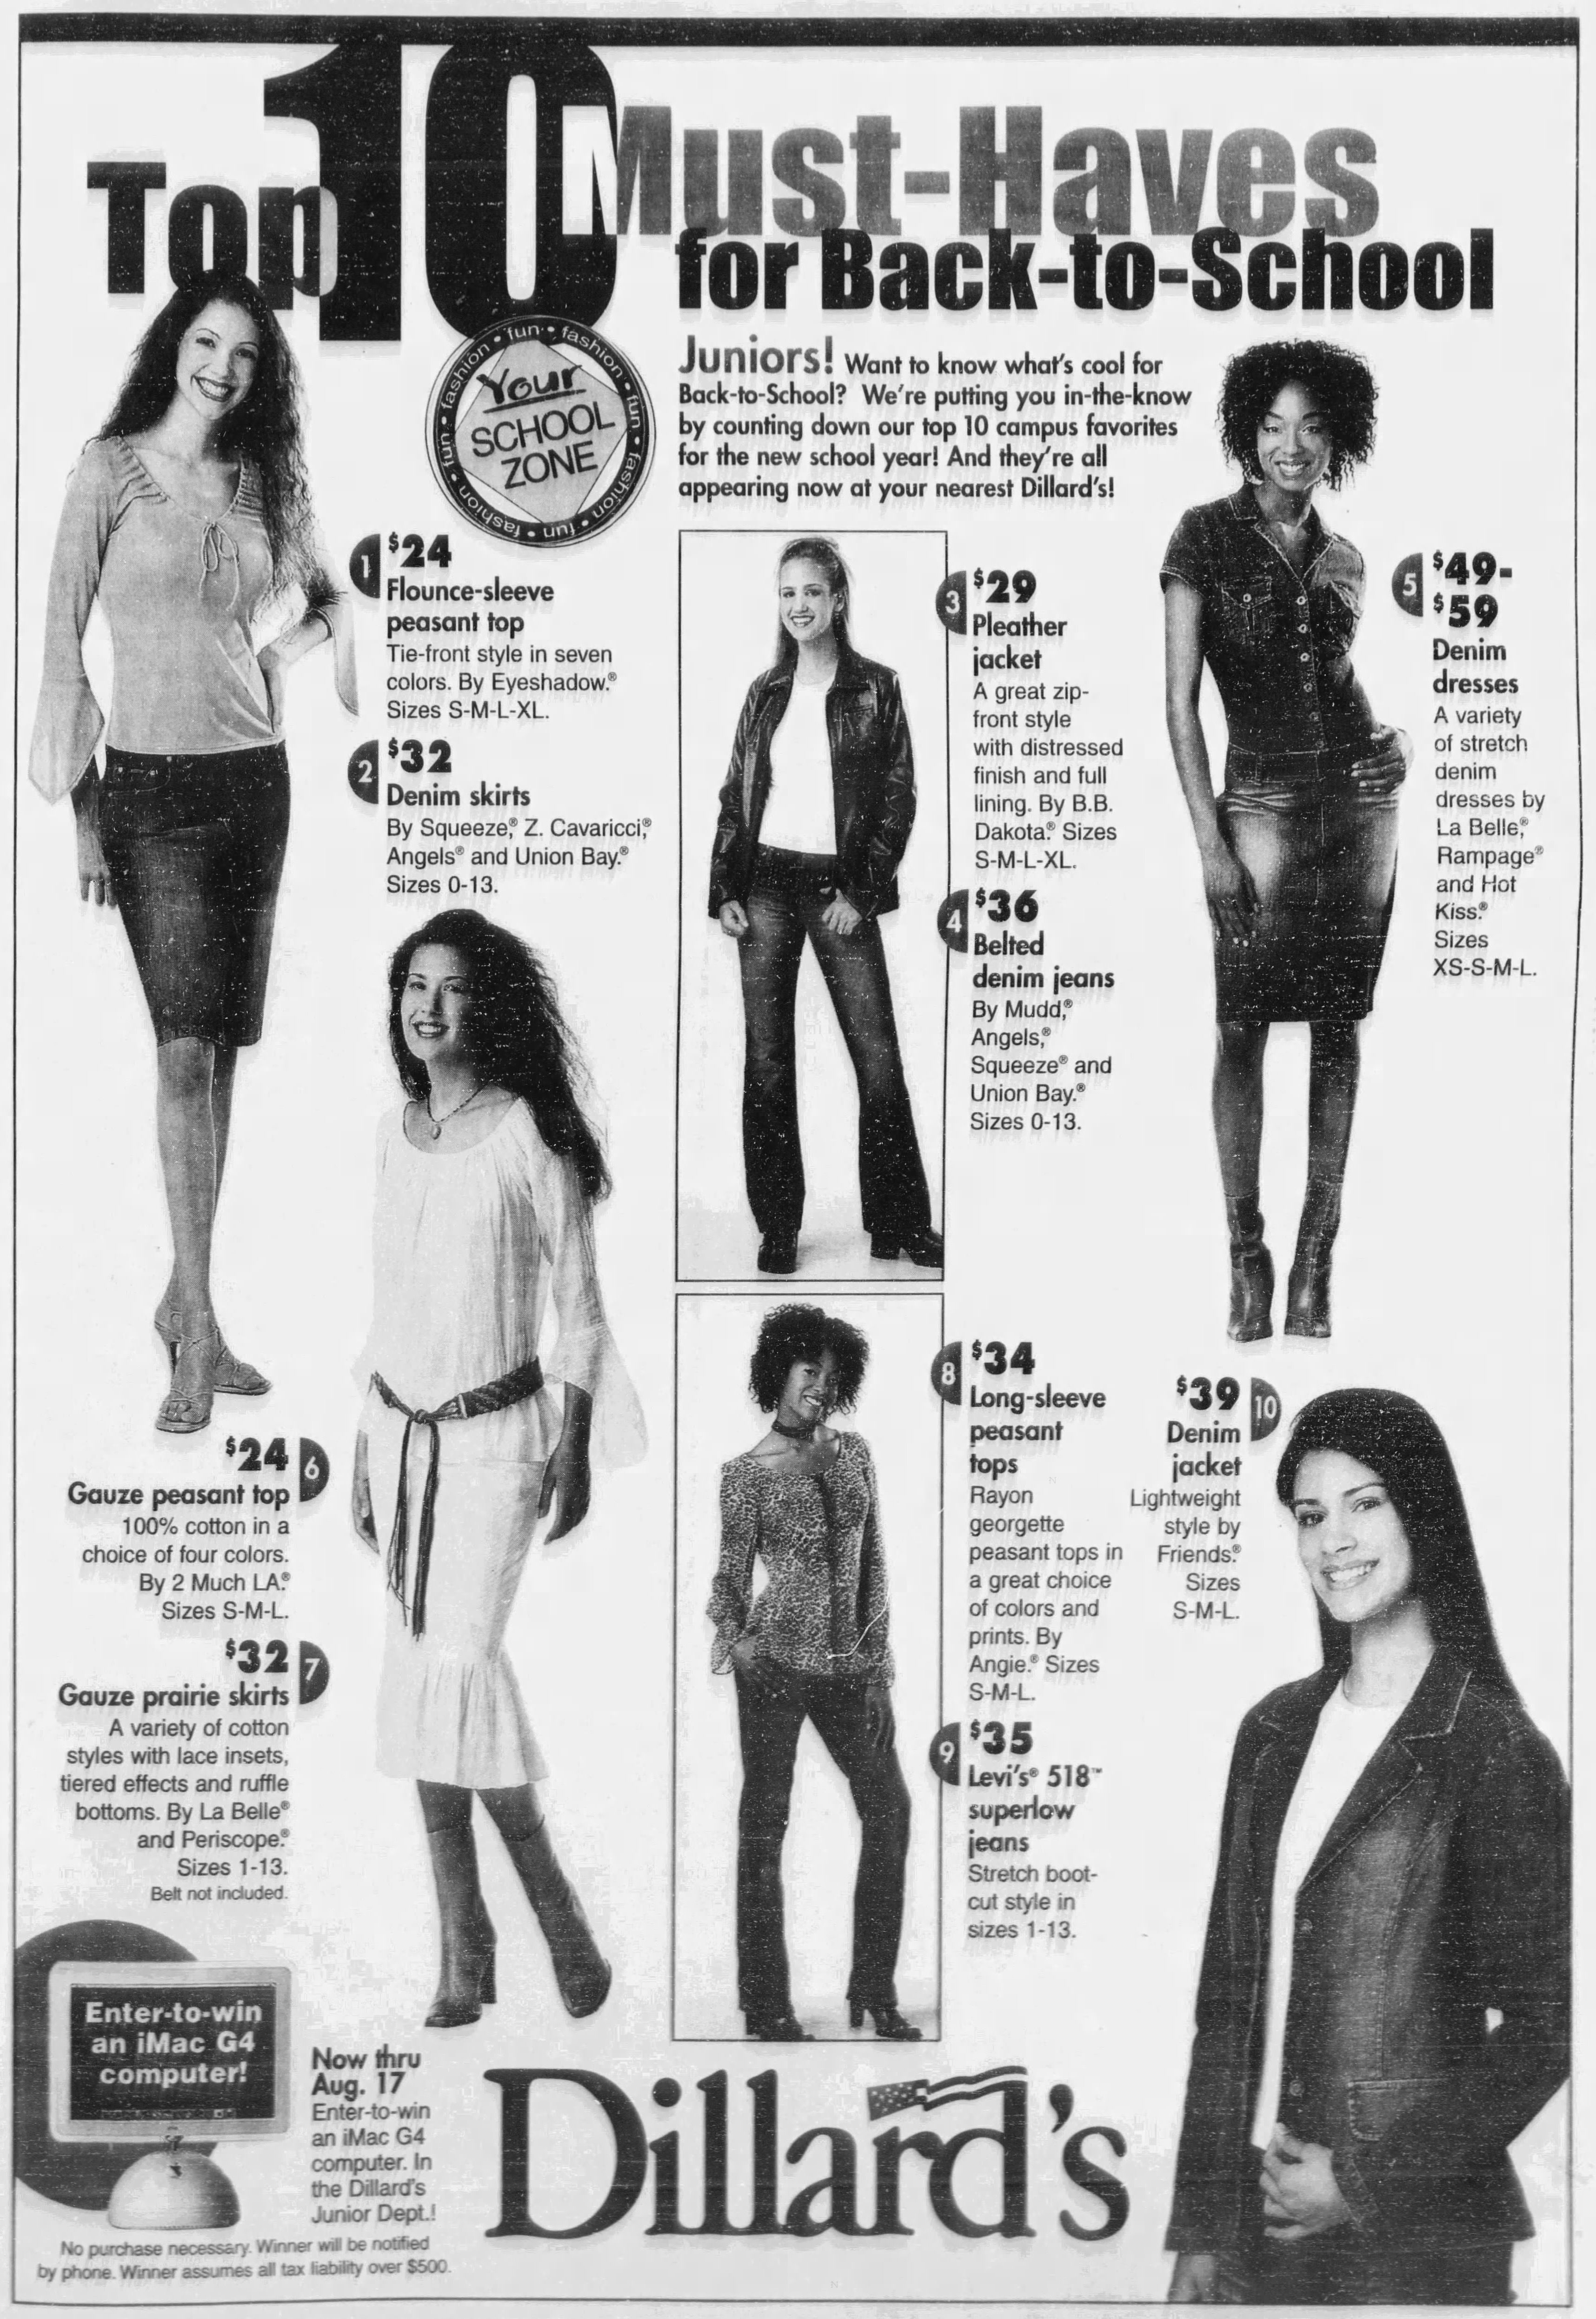 A back-to-school ad from 2002 features low-rise jeans, dresses and skirts.